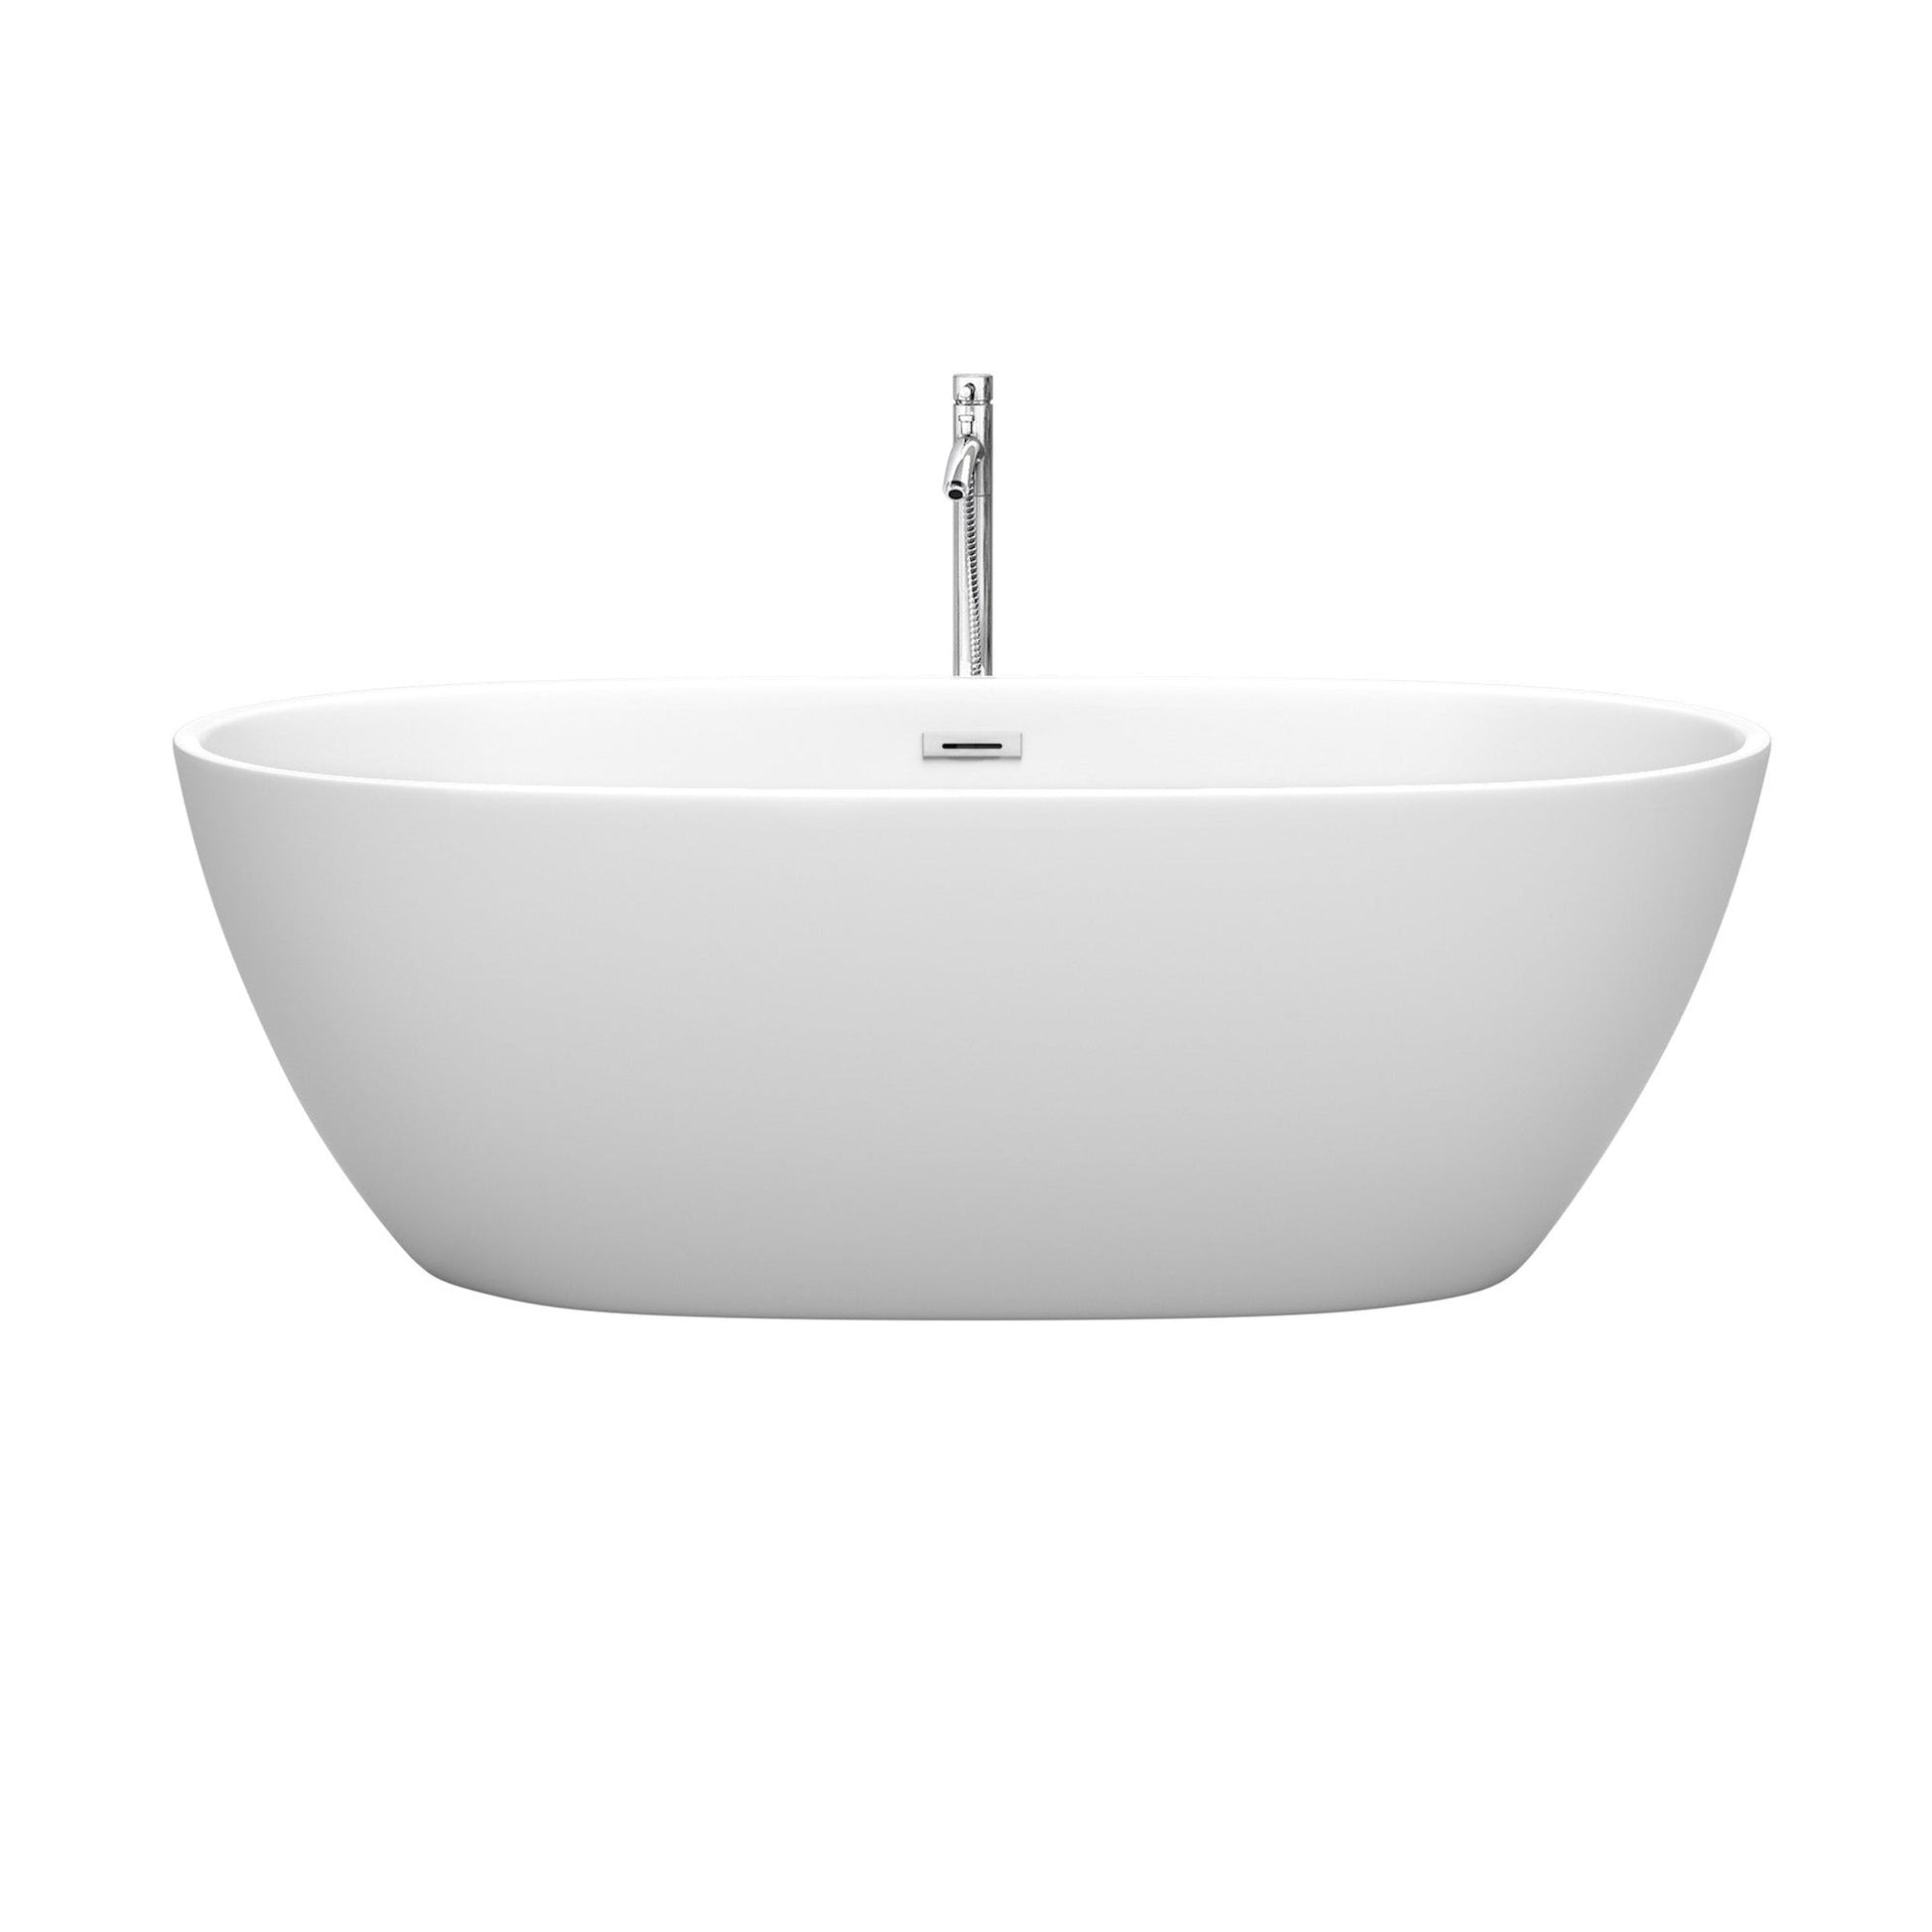 Wyndham Collection Juno 67" Freestanding Bathtub in Matte White With Floor Mounted Faucet, Drain and Overflow Trim in Polished Chrome